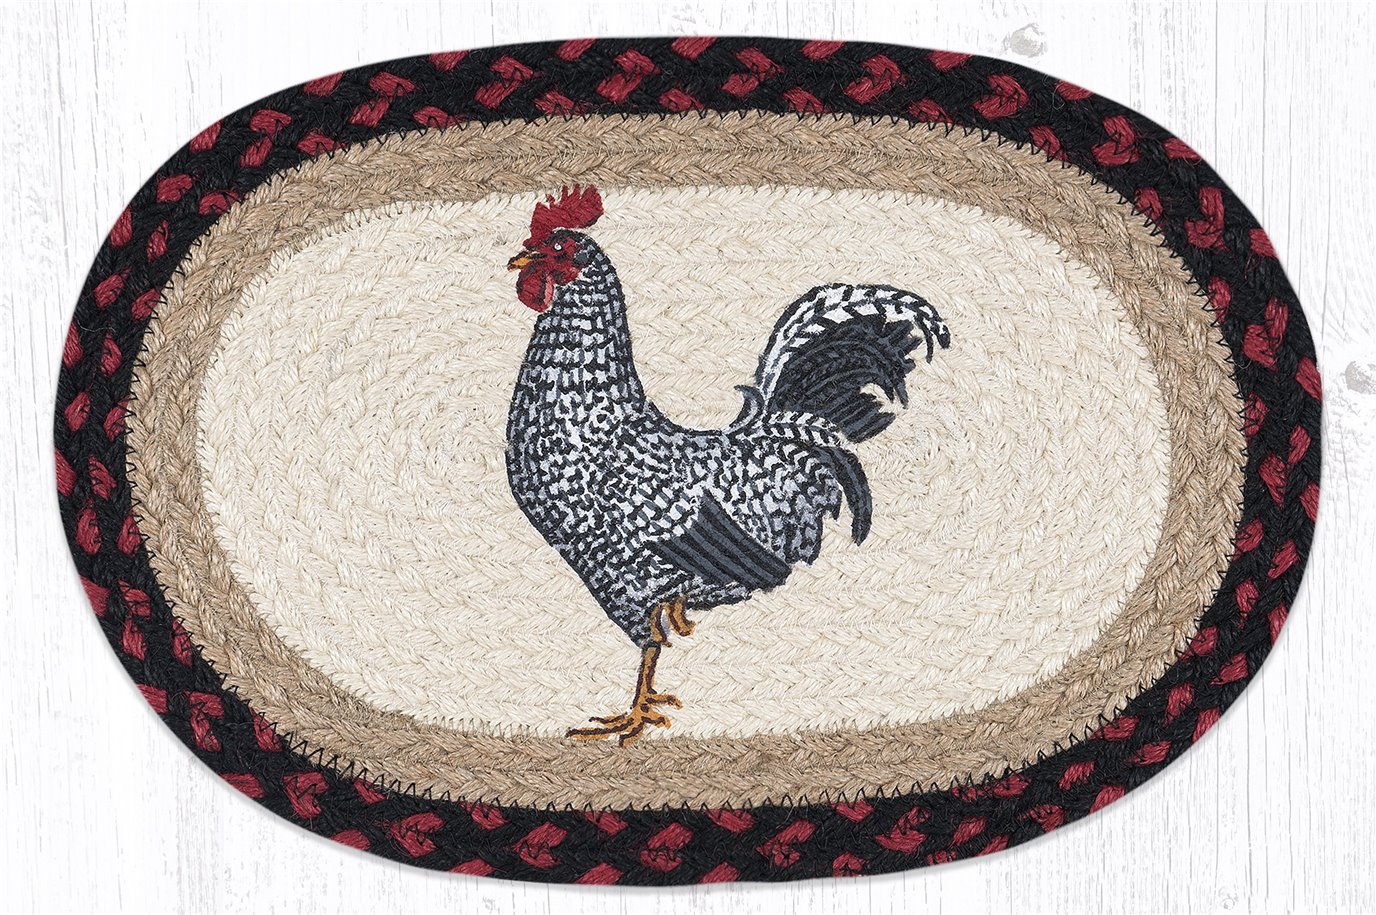 Black & White Rooster Printed Oval Braided Swatch 10